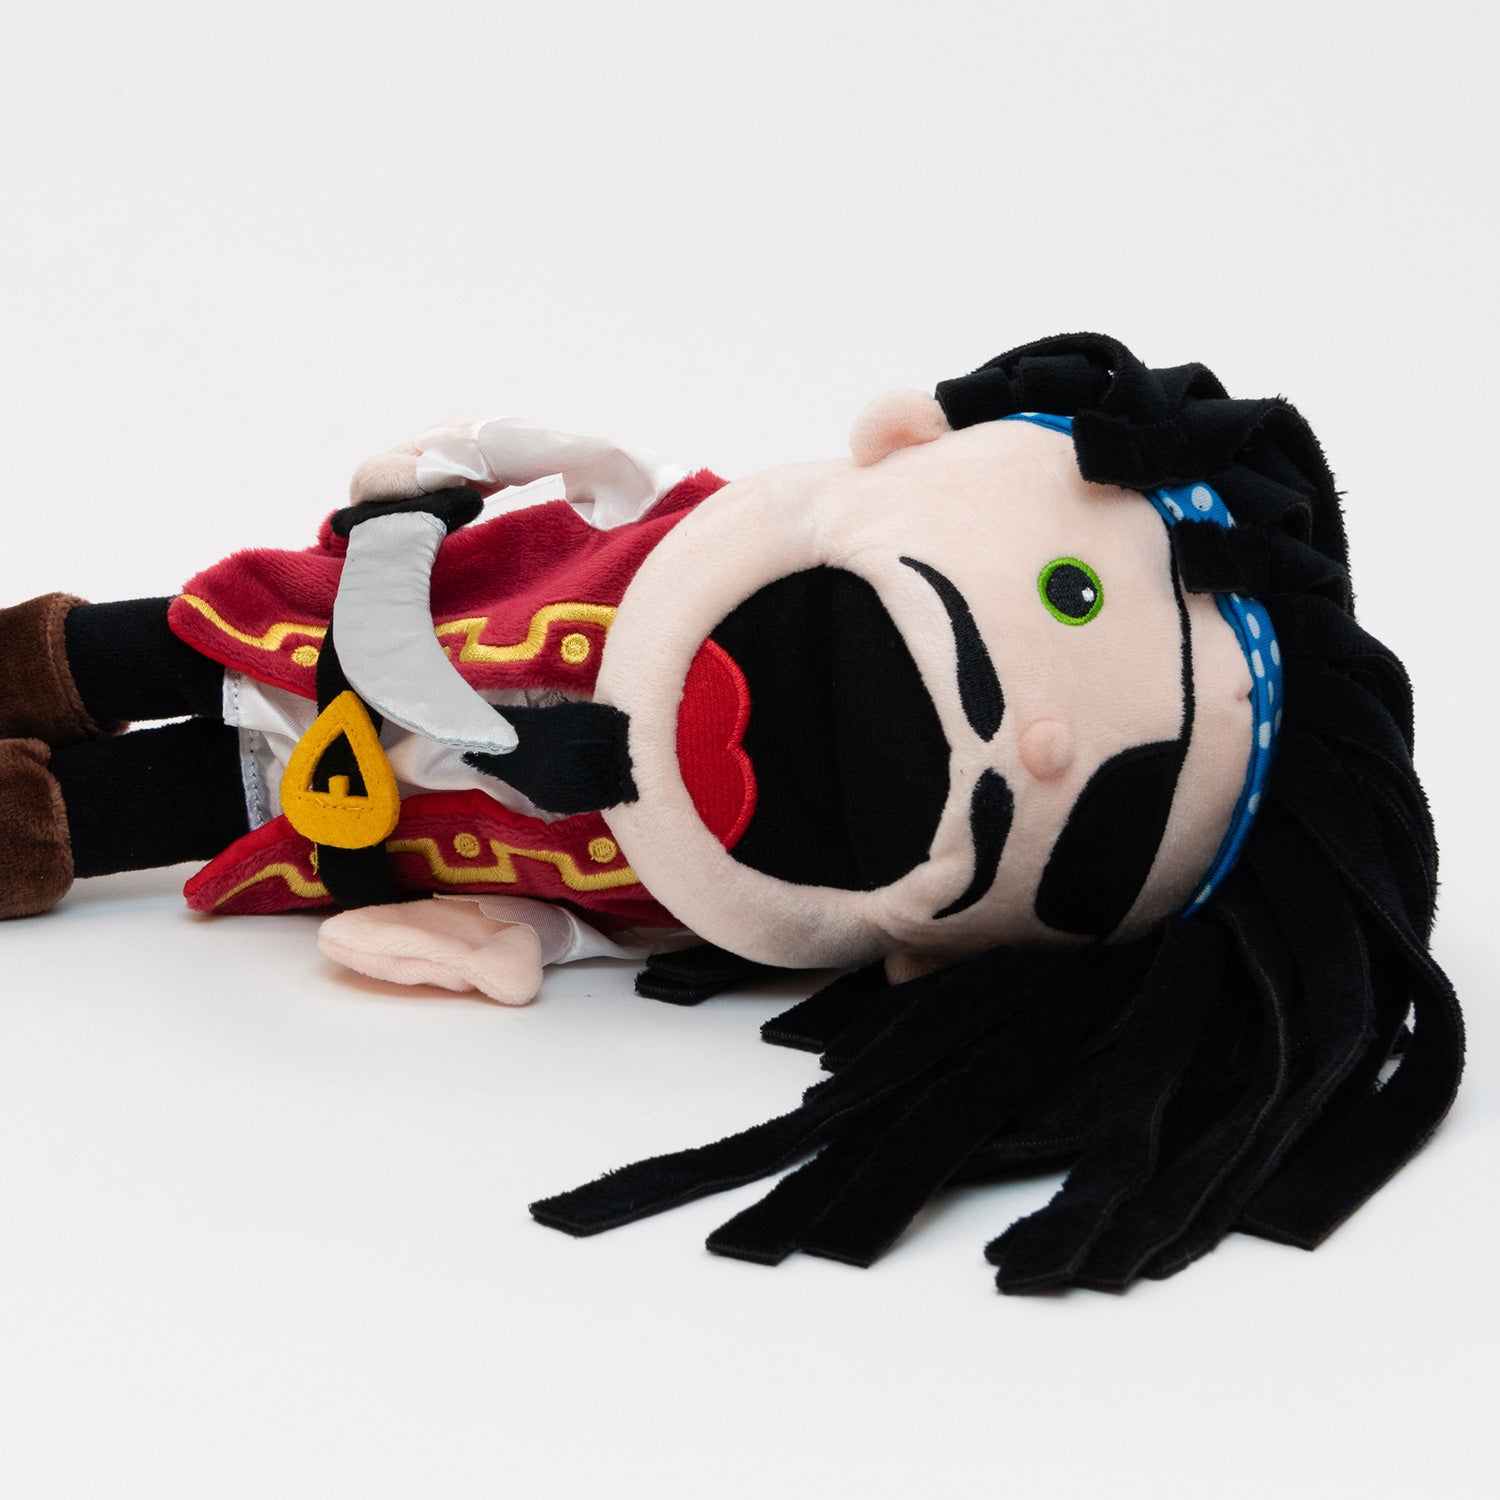 Pirate Hand Puppet. The adorable details of this fun fabric character include fabulous black floppy hair, a silver pirate sword, and a moving mouth with toune. Complete with black eyepatch, mustache & goatee, Red and gold detailed vest and belt, a white shirt and brown boots.